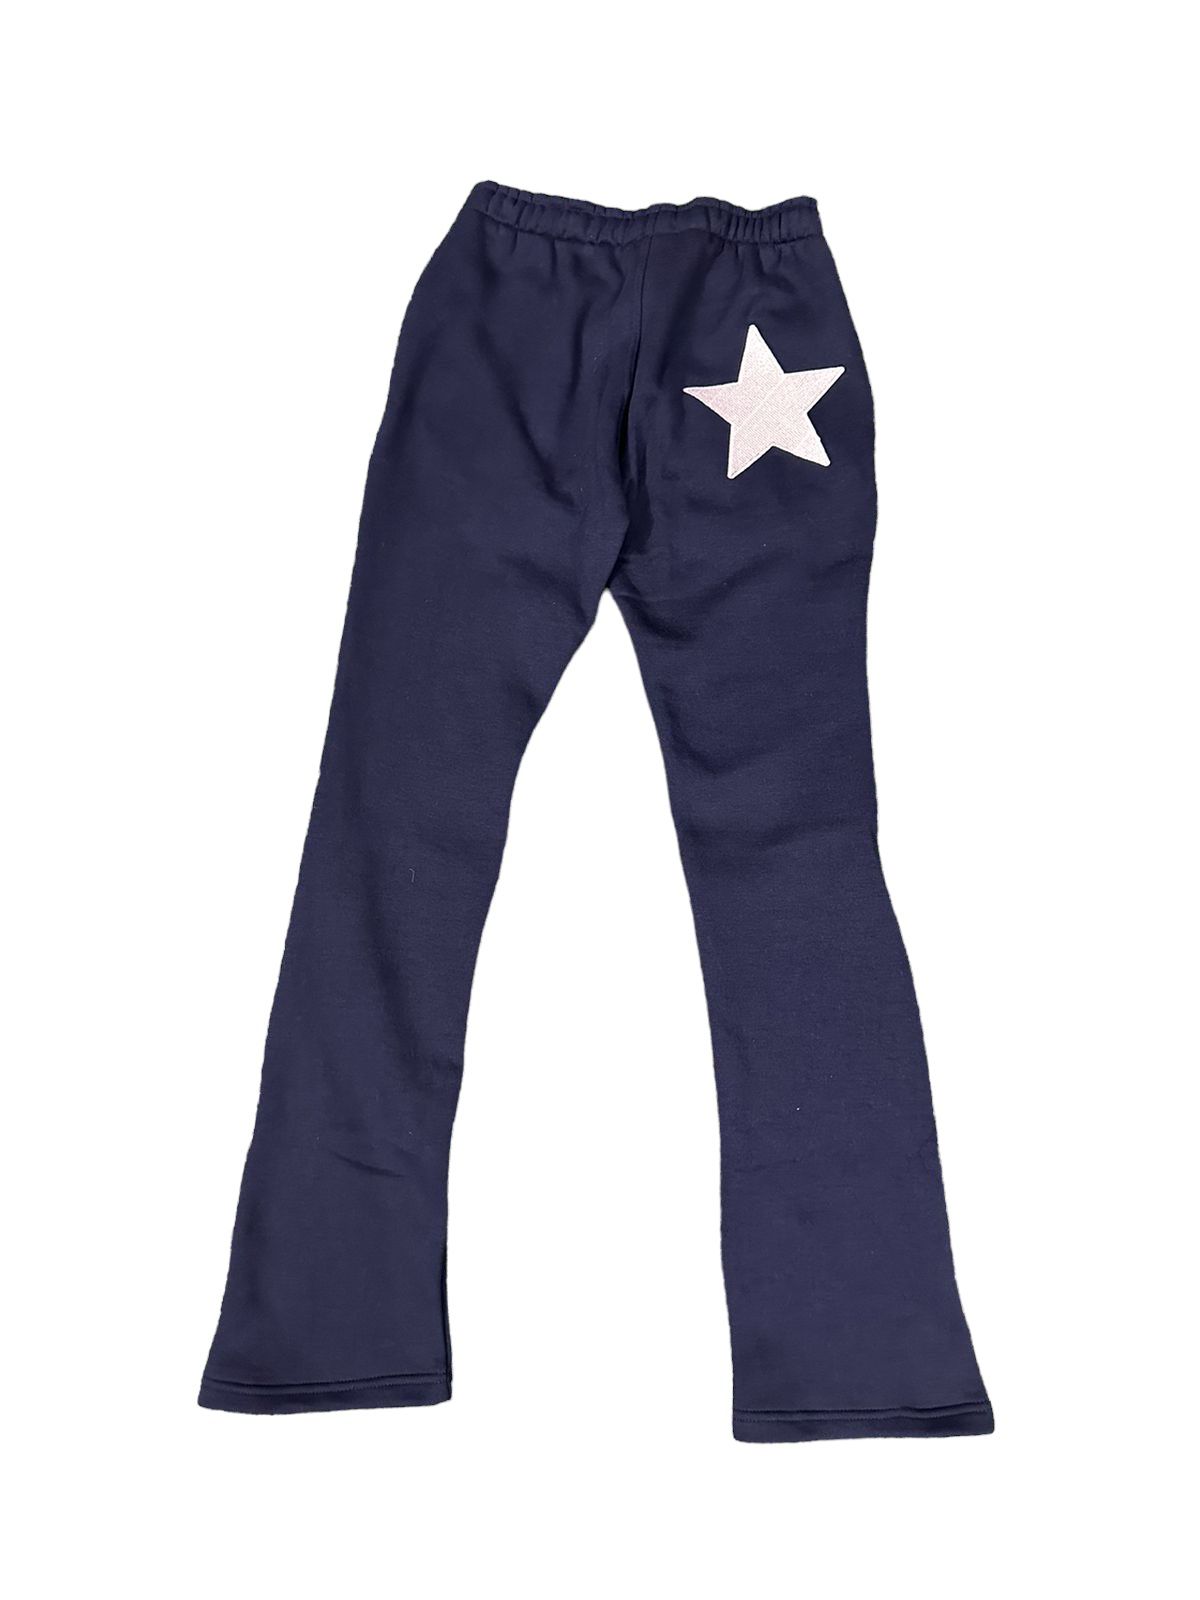 Trackpants: Shop Online Women Navy Blue Polyester Trackpants